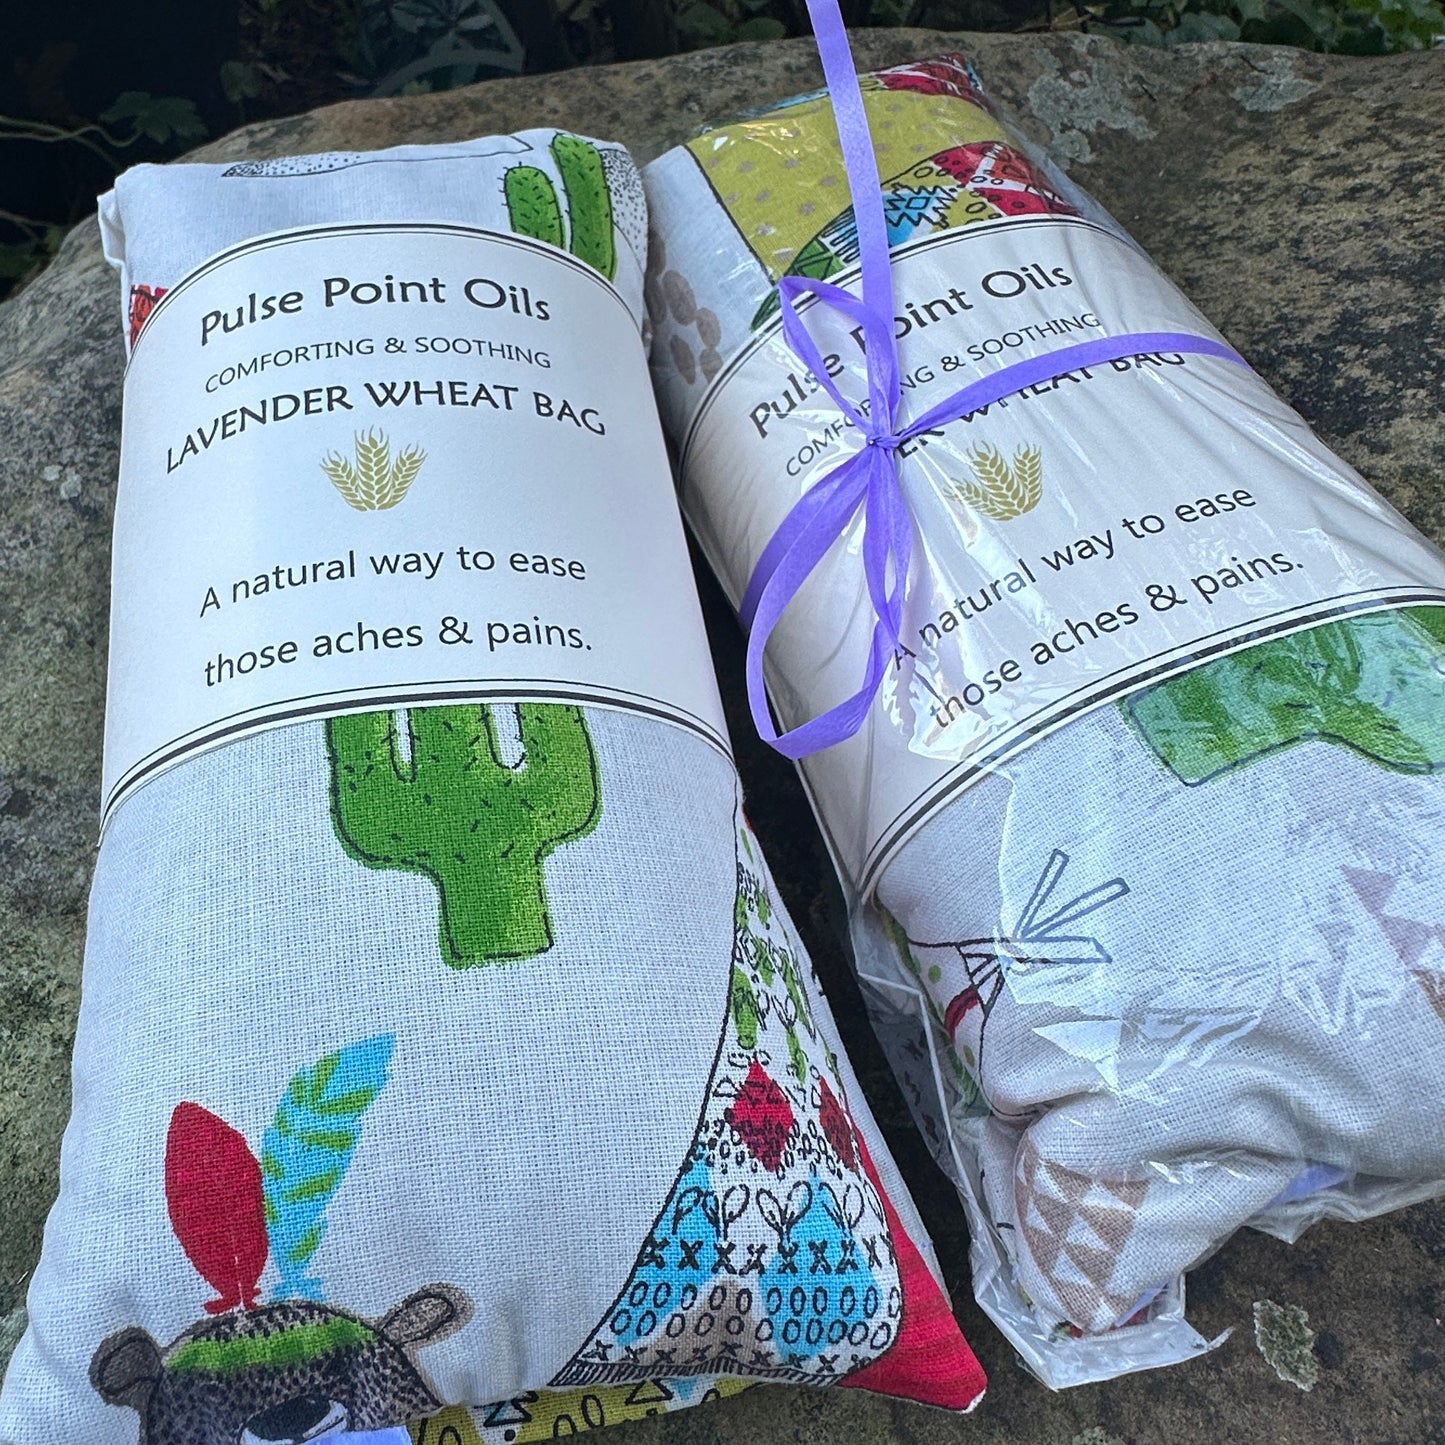 Re-usable wellness gift, heat pack body warmer wheat bag with whole wheat and English lavender to aid calm and relaxation.